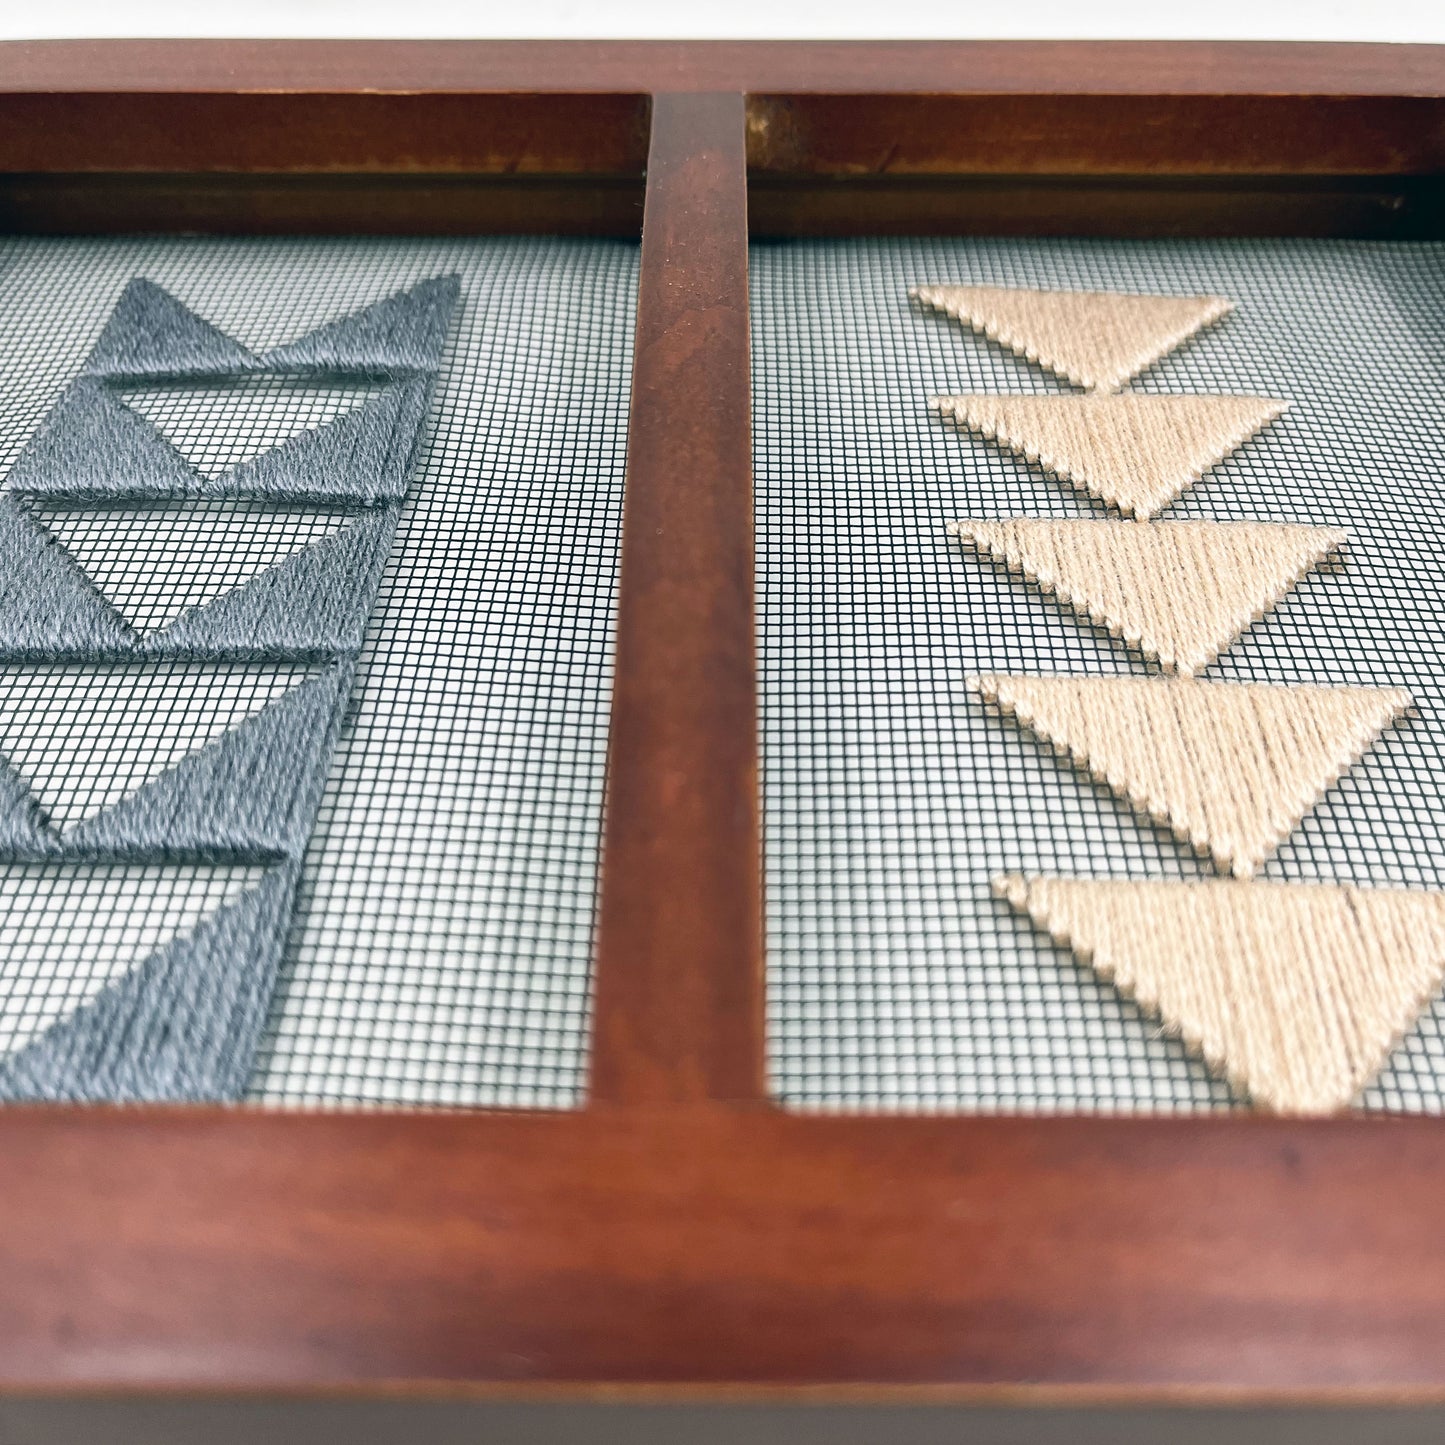 Small double panel wood frame holding window screen hand stitched with peach and grey triangles that form shapes of flying geese quilt pattern, on the left side a column of the border triangles in grey, on the right side the center triangles in peach